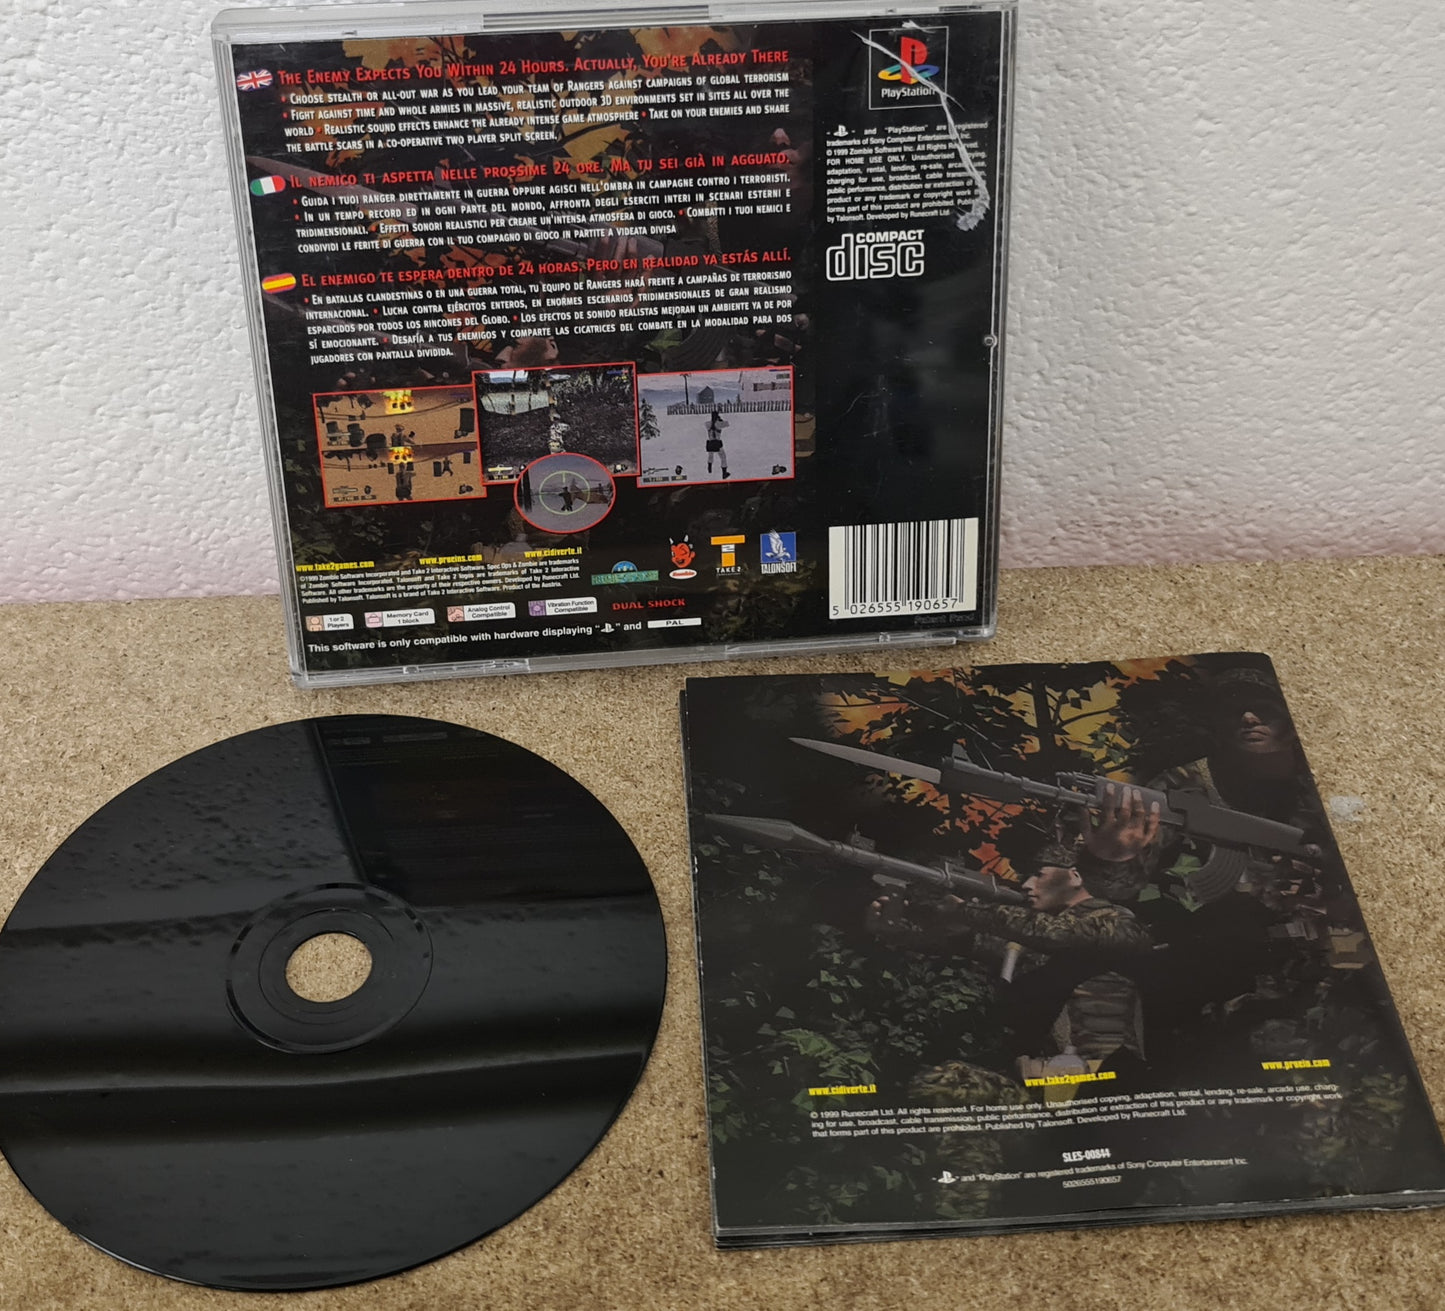 Spec Ops Stealth Patrol Sony Playstation 1 (PS1) Game